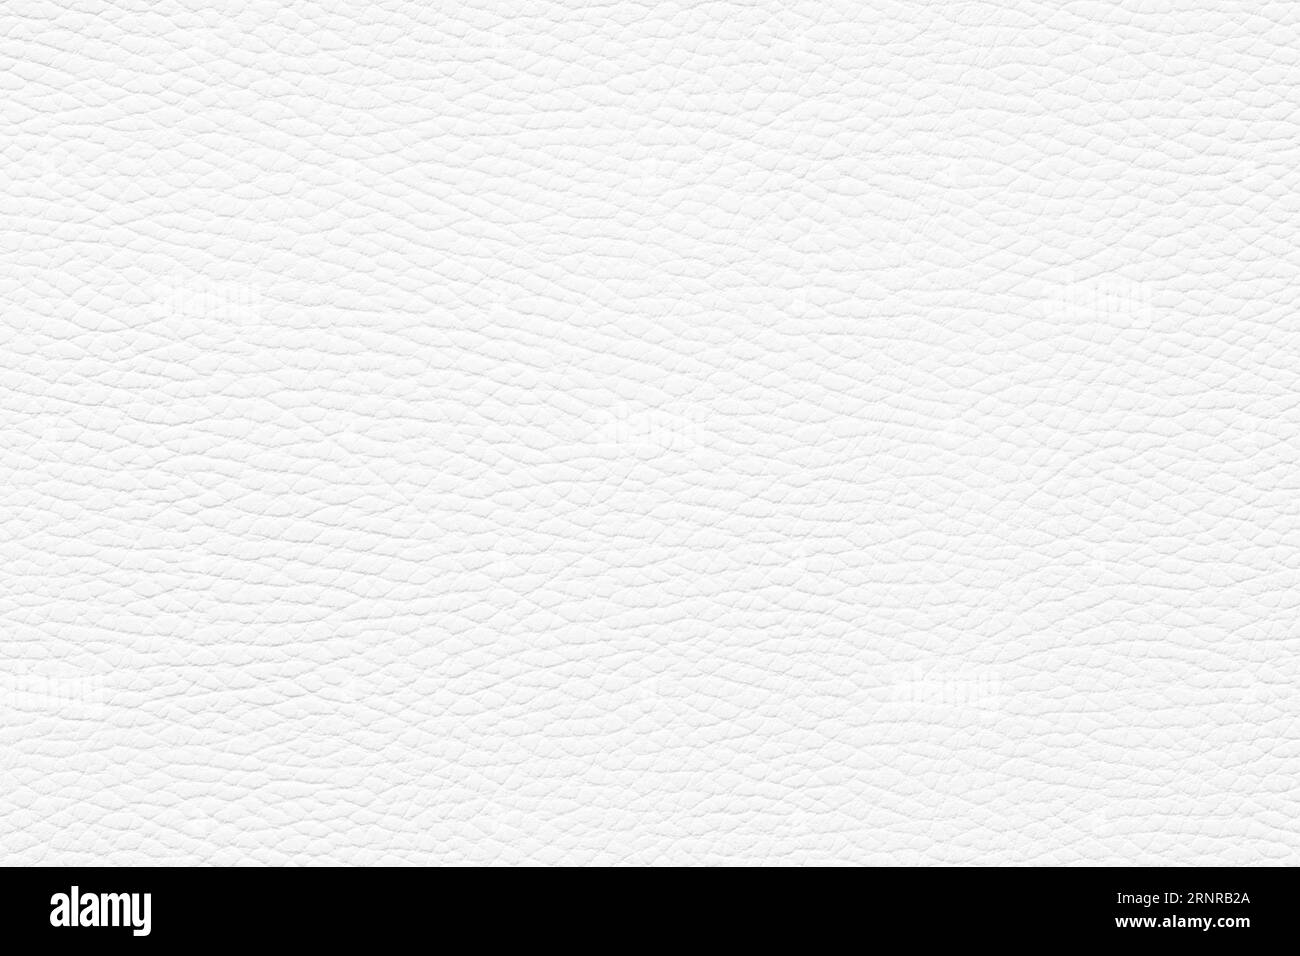 white leather texture background. animal skin with natural pattern Stock Photo